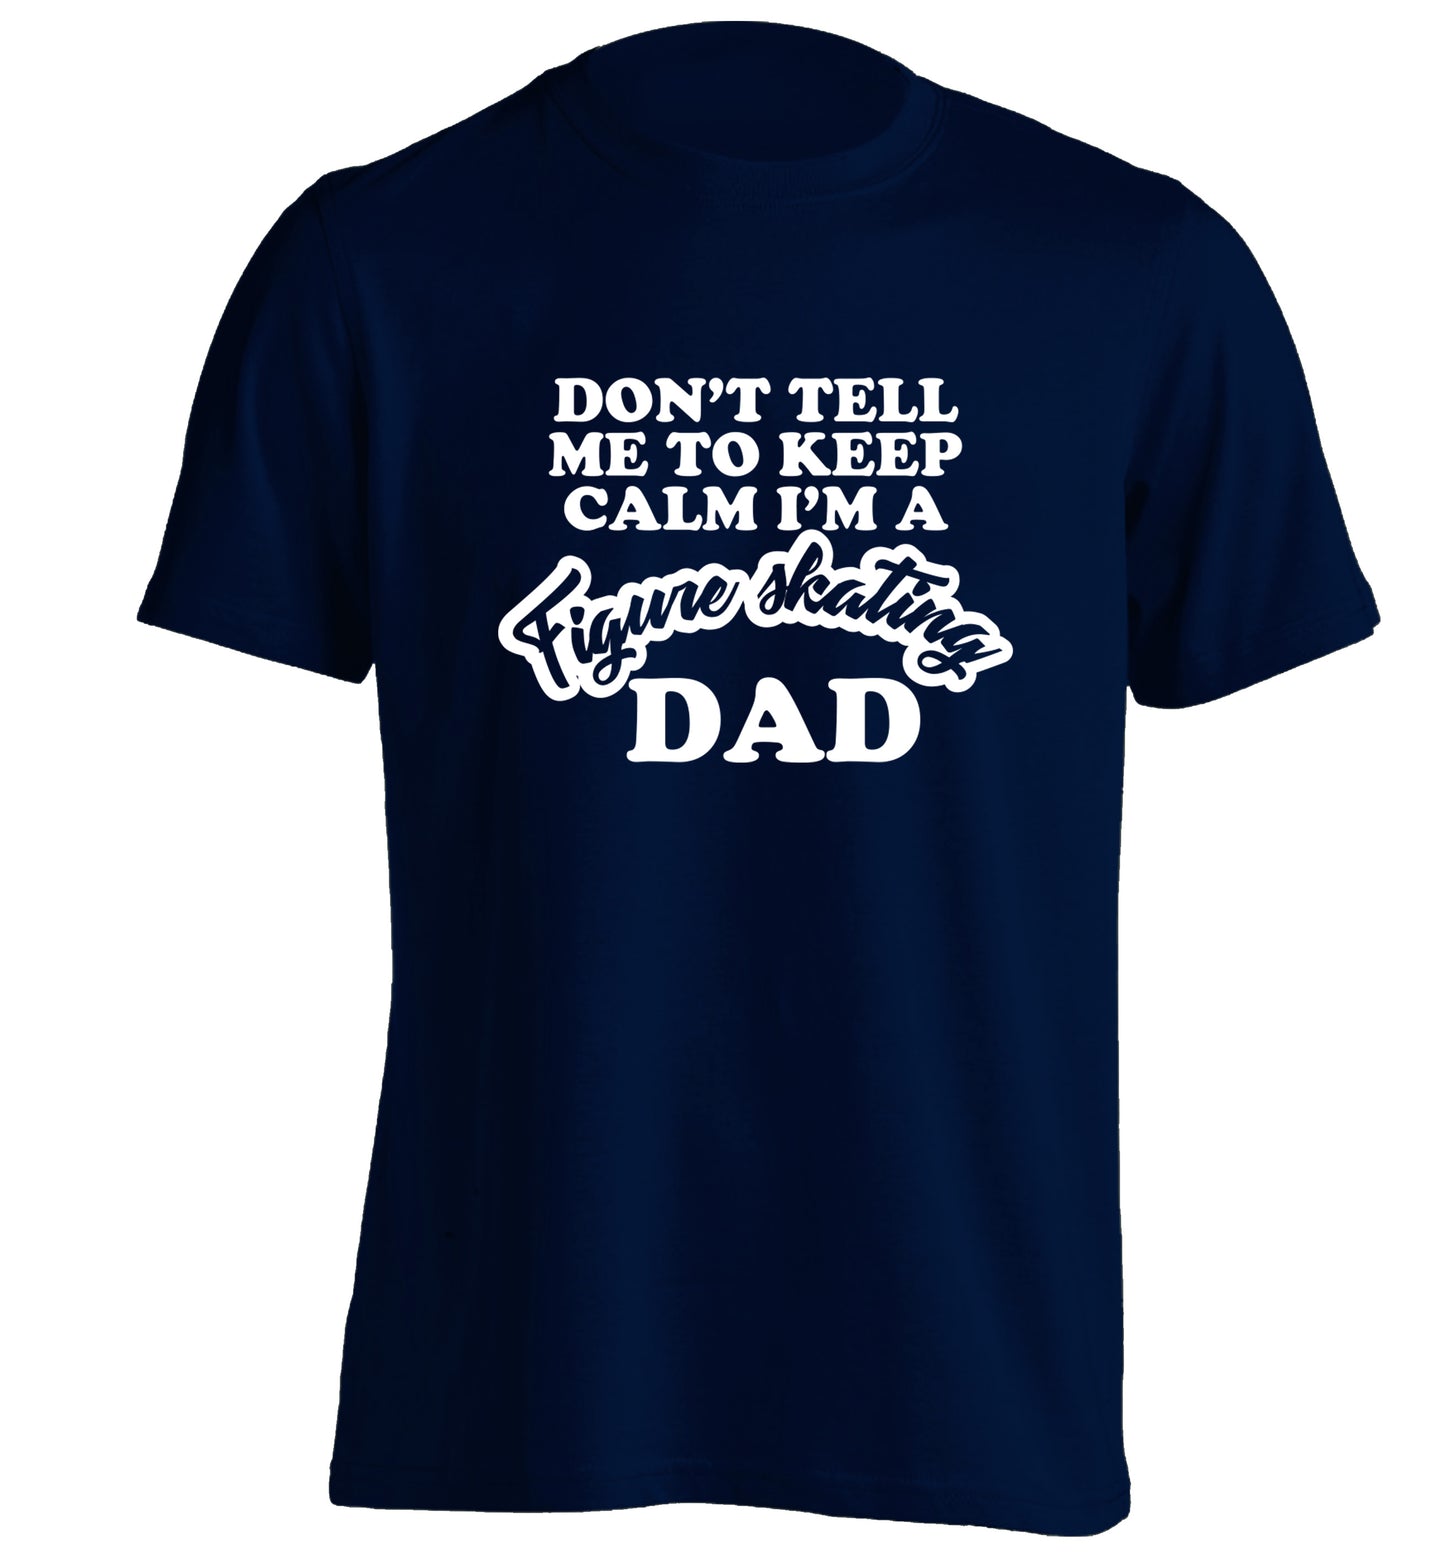 Don't tell me to keep calm I'm a figure skating dad adults unisexnavy Tshirt 2XL